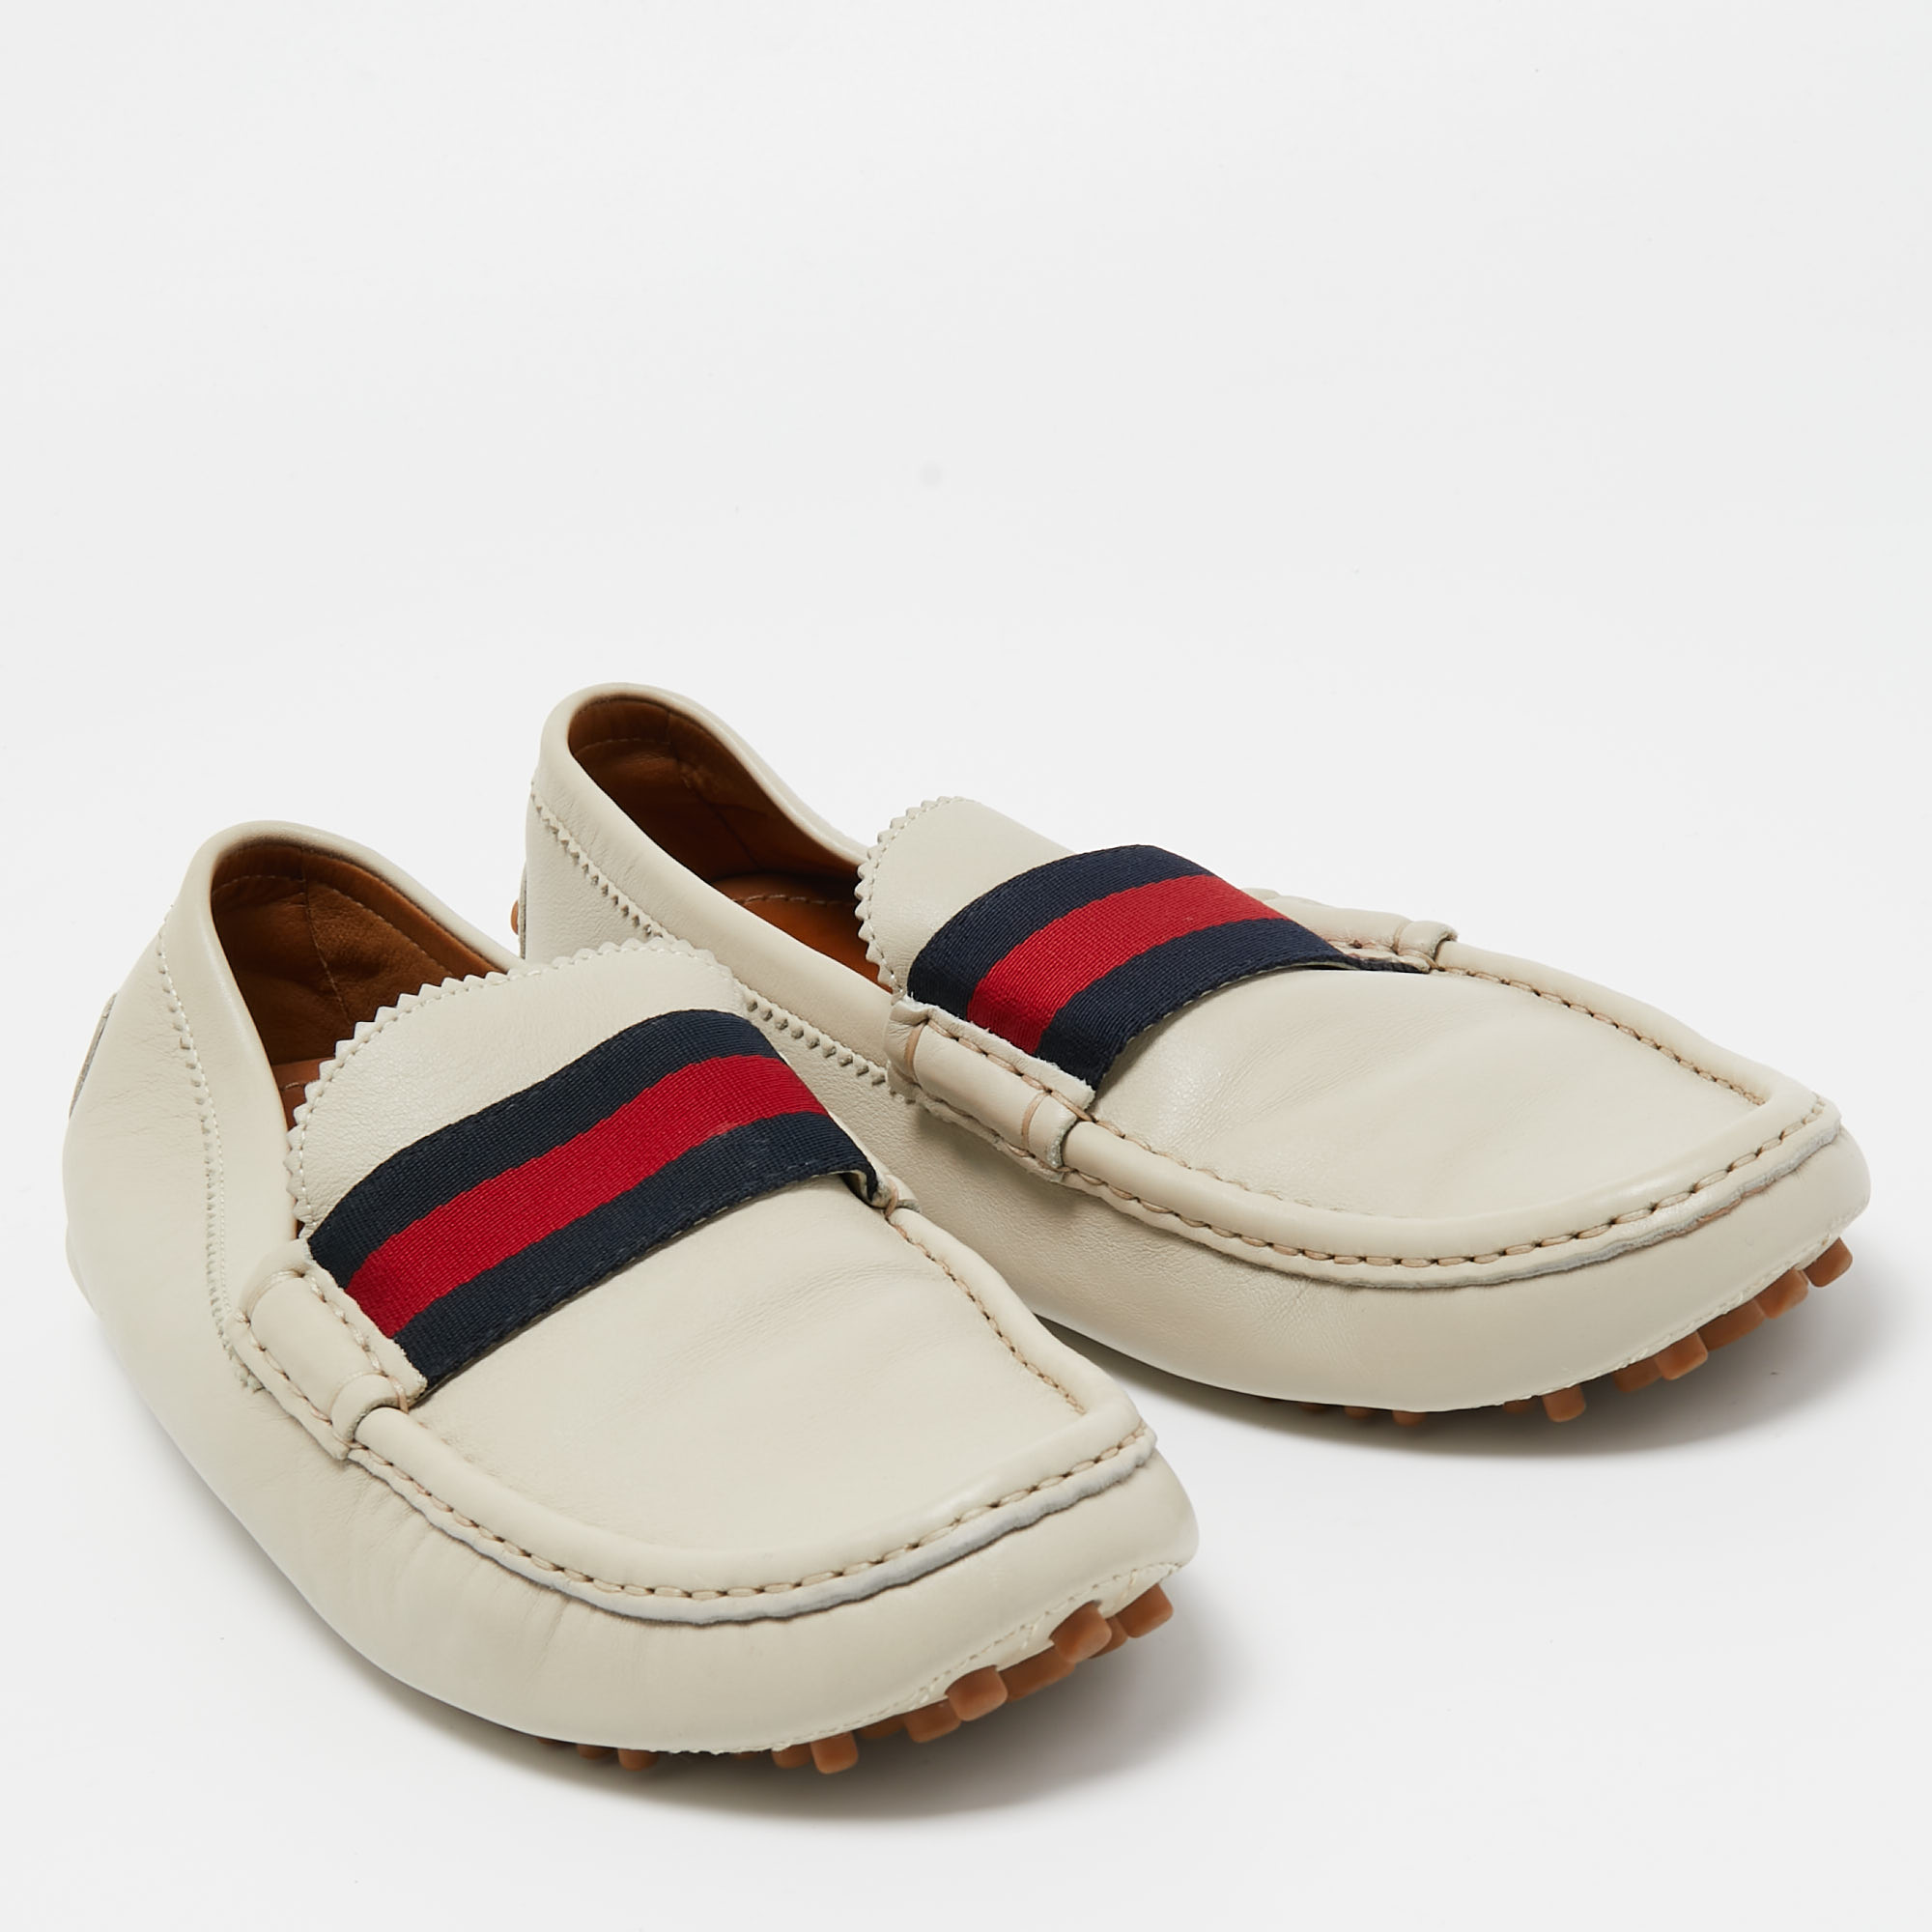 Gucci Cream Leather Web Slip On Loafers Size 43.5